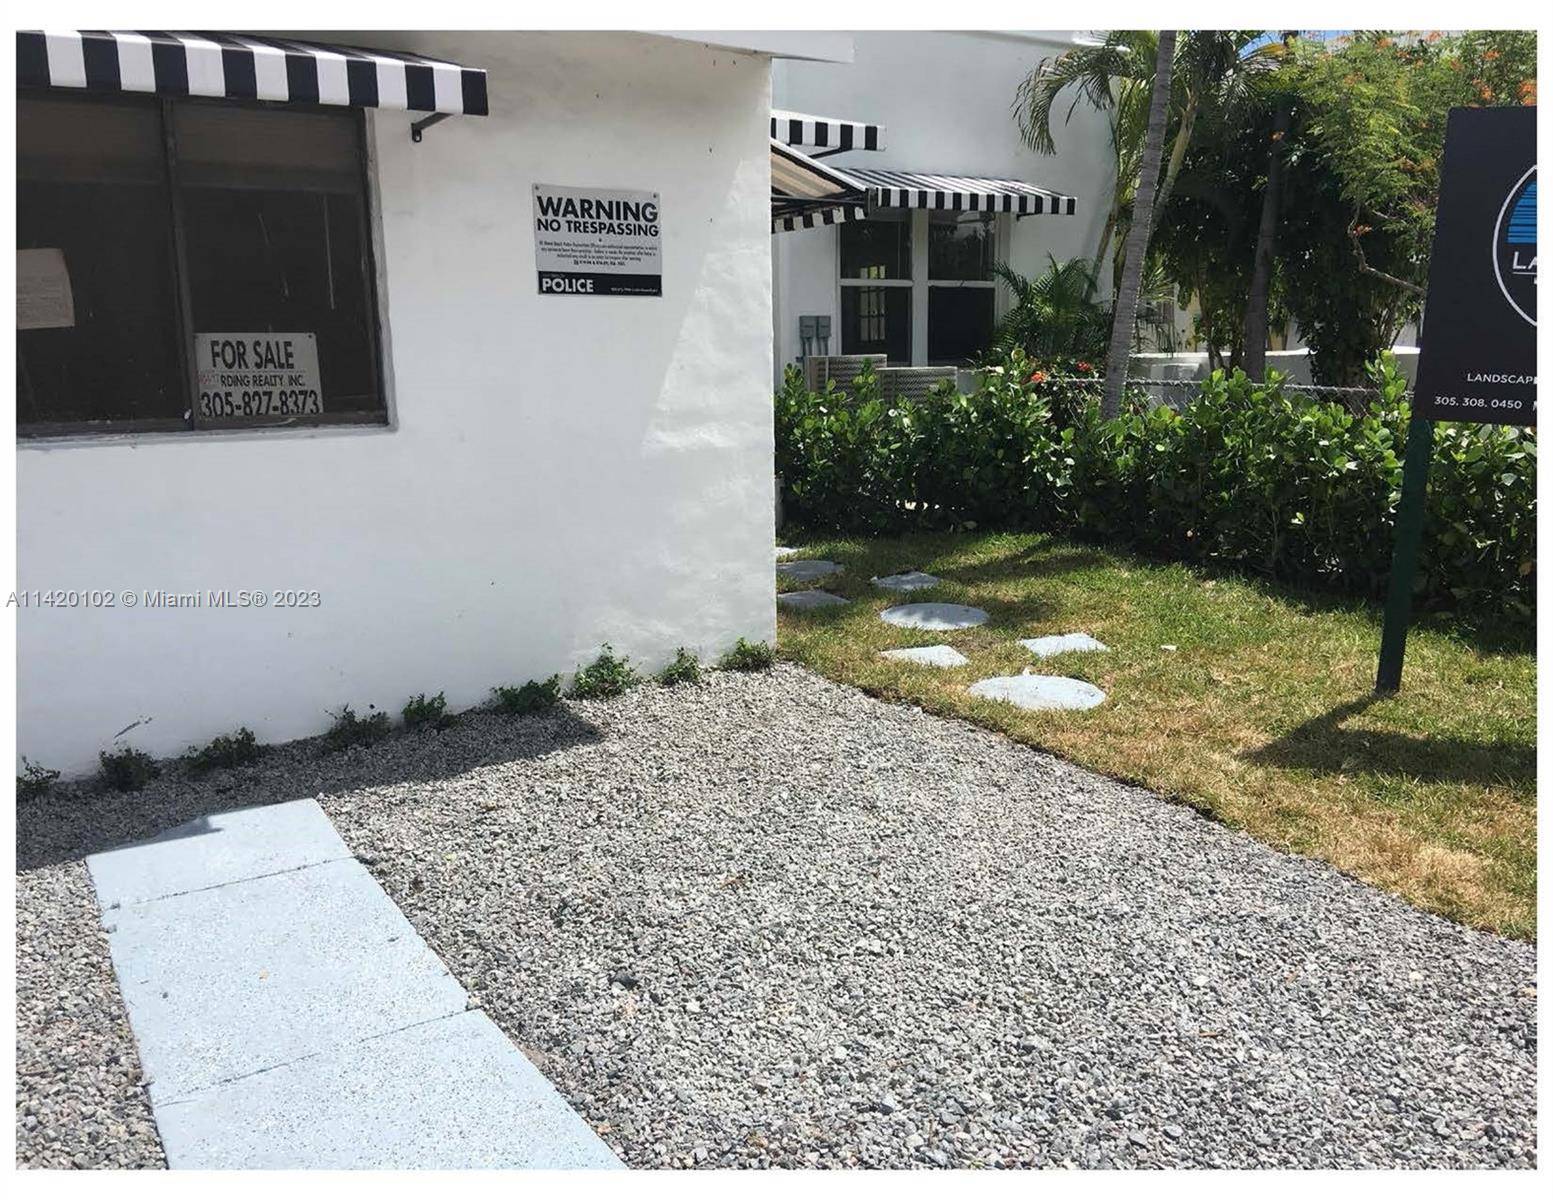 located in central Miami Beach 1 2 block from the ocean this is a 3 unit triplex, this is one of the units.